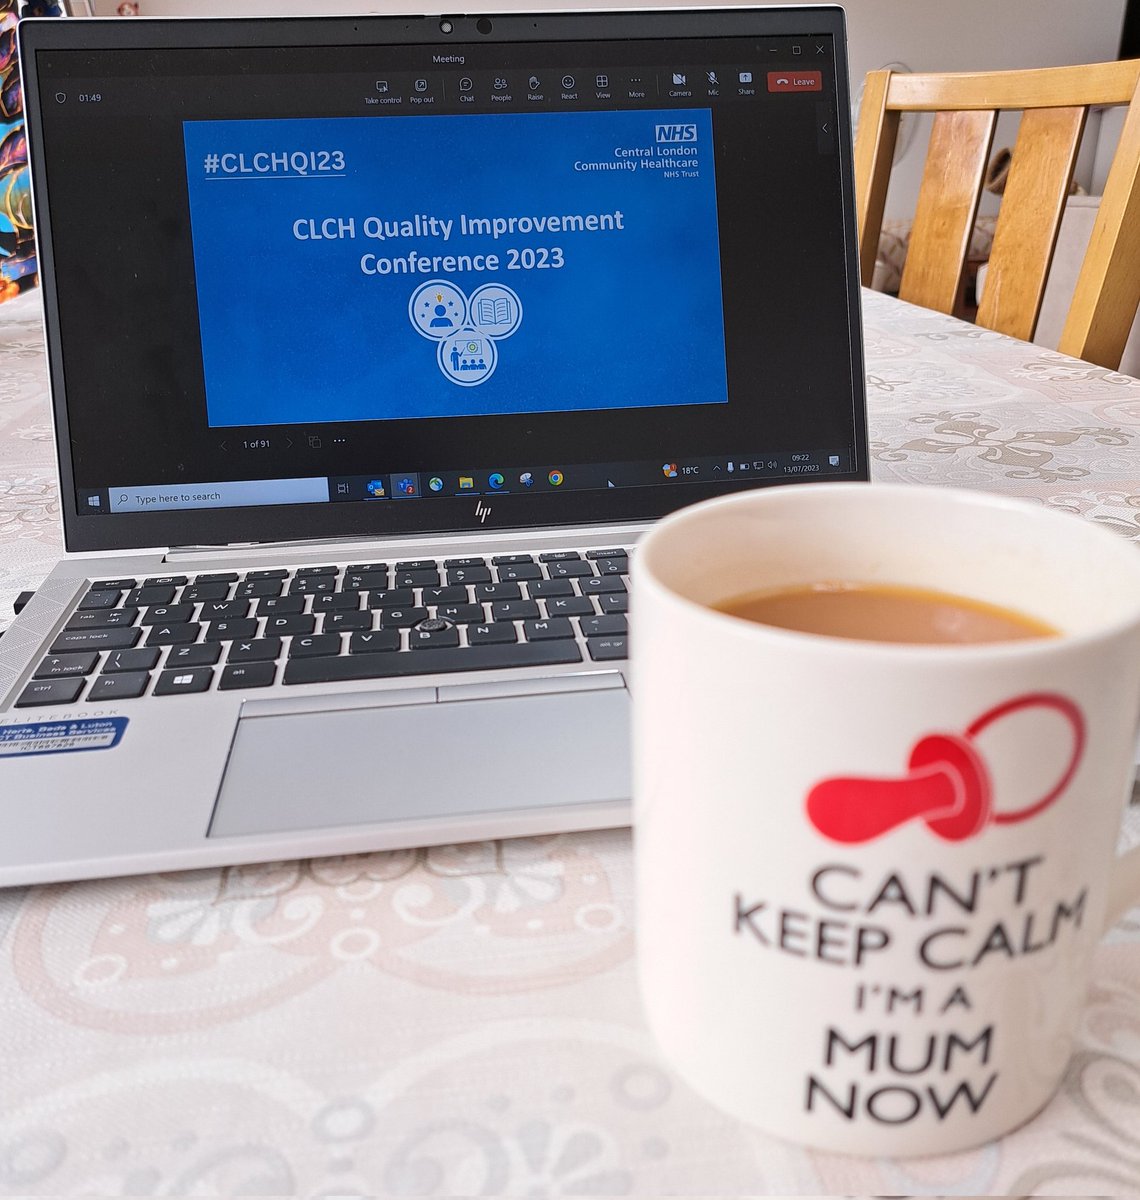 Excited to attend CLCH's QI conference this morning.
Tea's ready!✅️

Always learning... always thinking about #MakingThingsBetter 
@KirstieSimpso14 #QITwitter #CLCHQI23